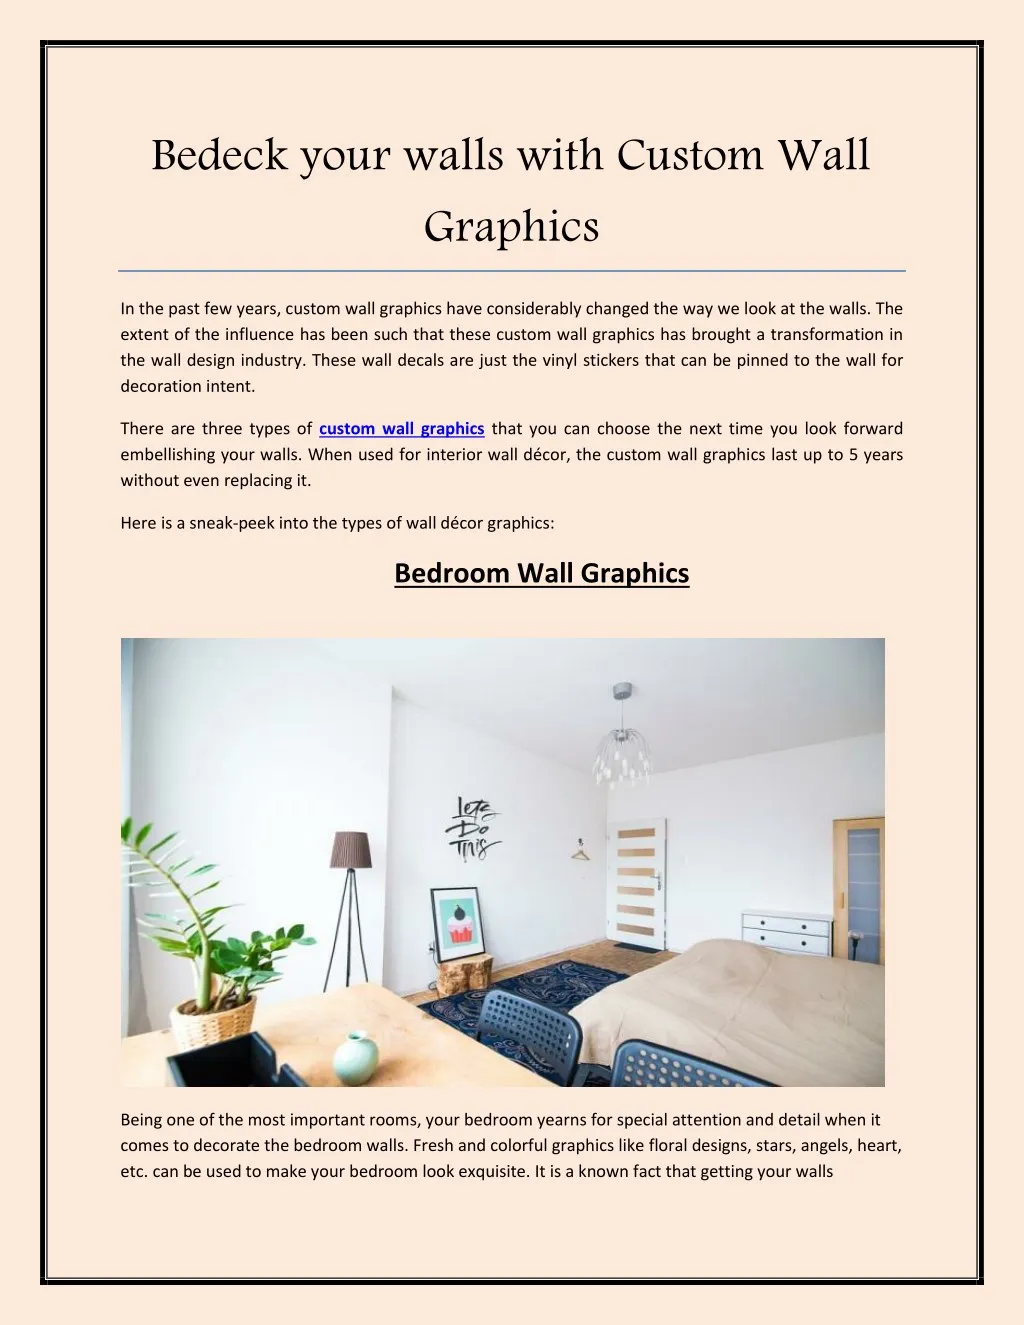 bedeck your walls with custom wall graphics